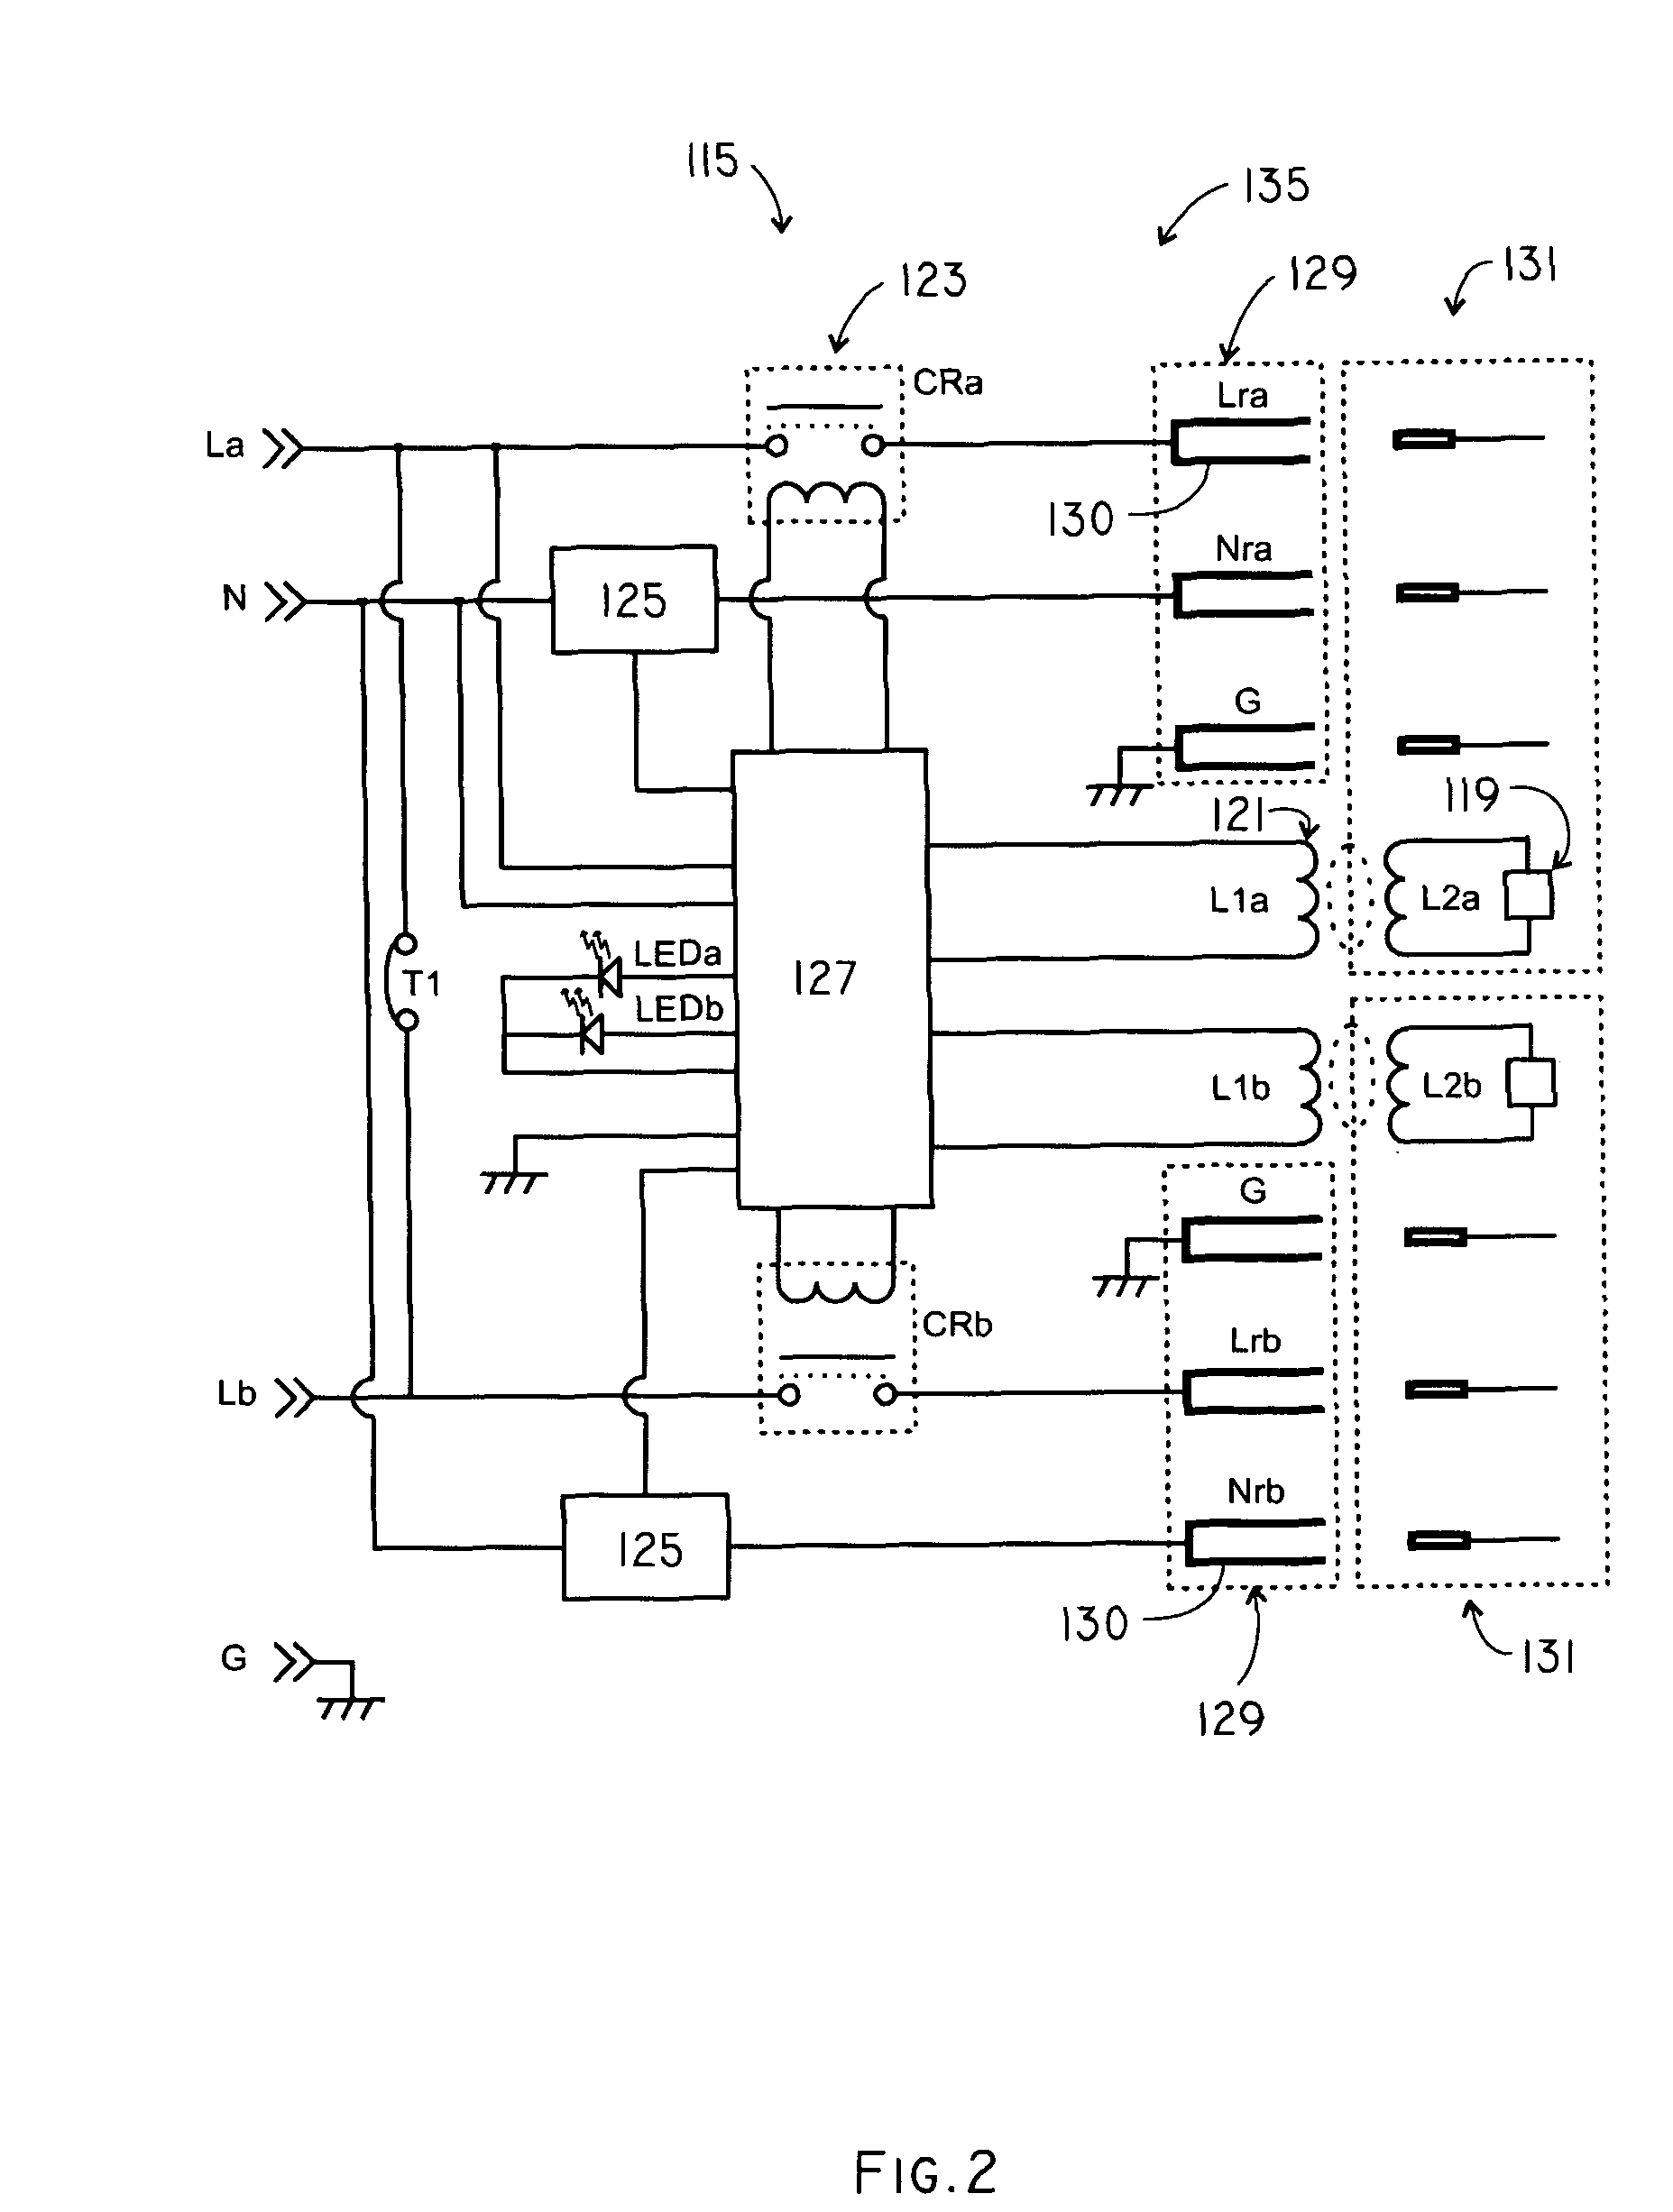 Electrical power distribution system